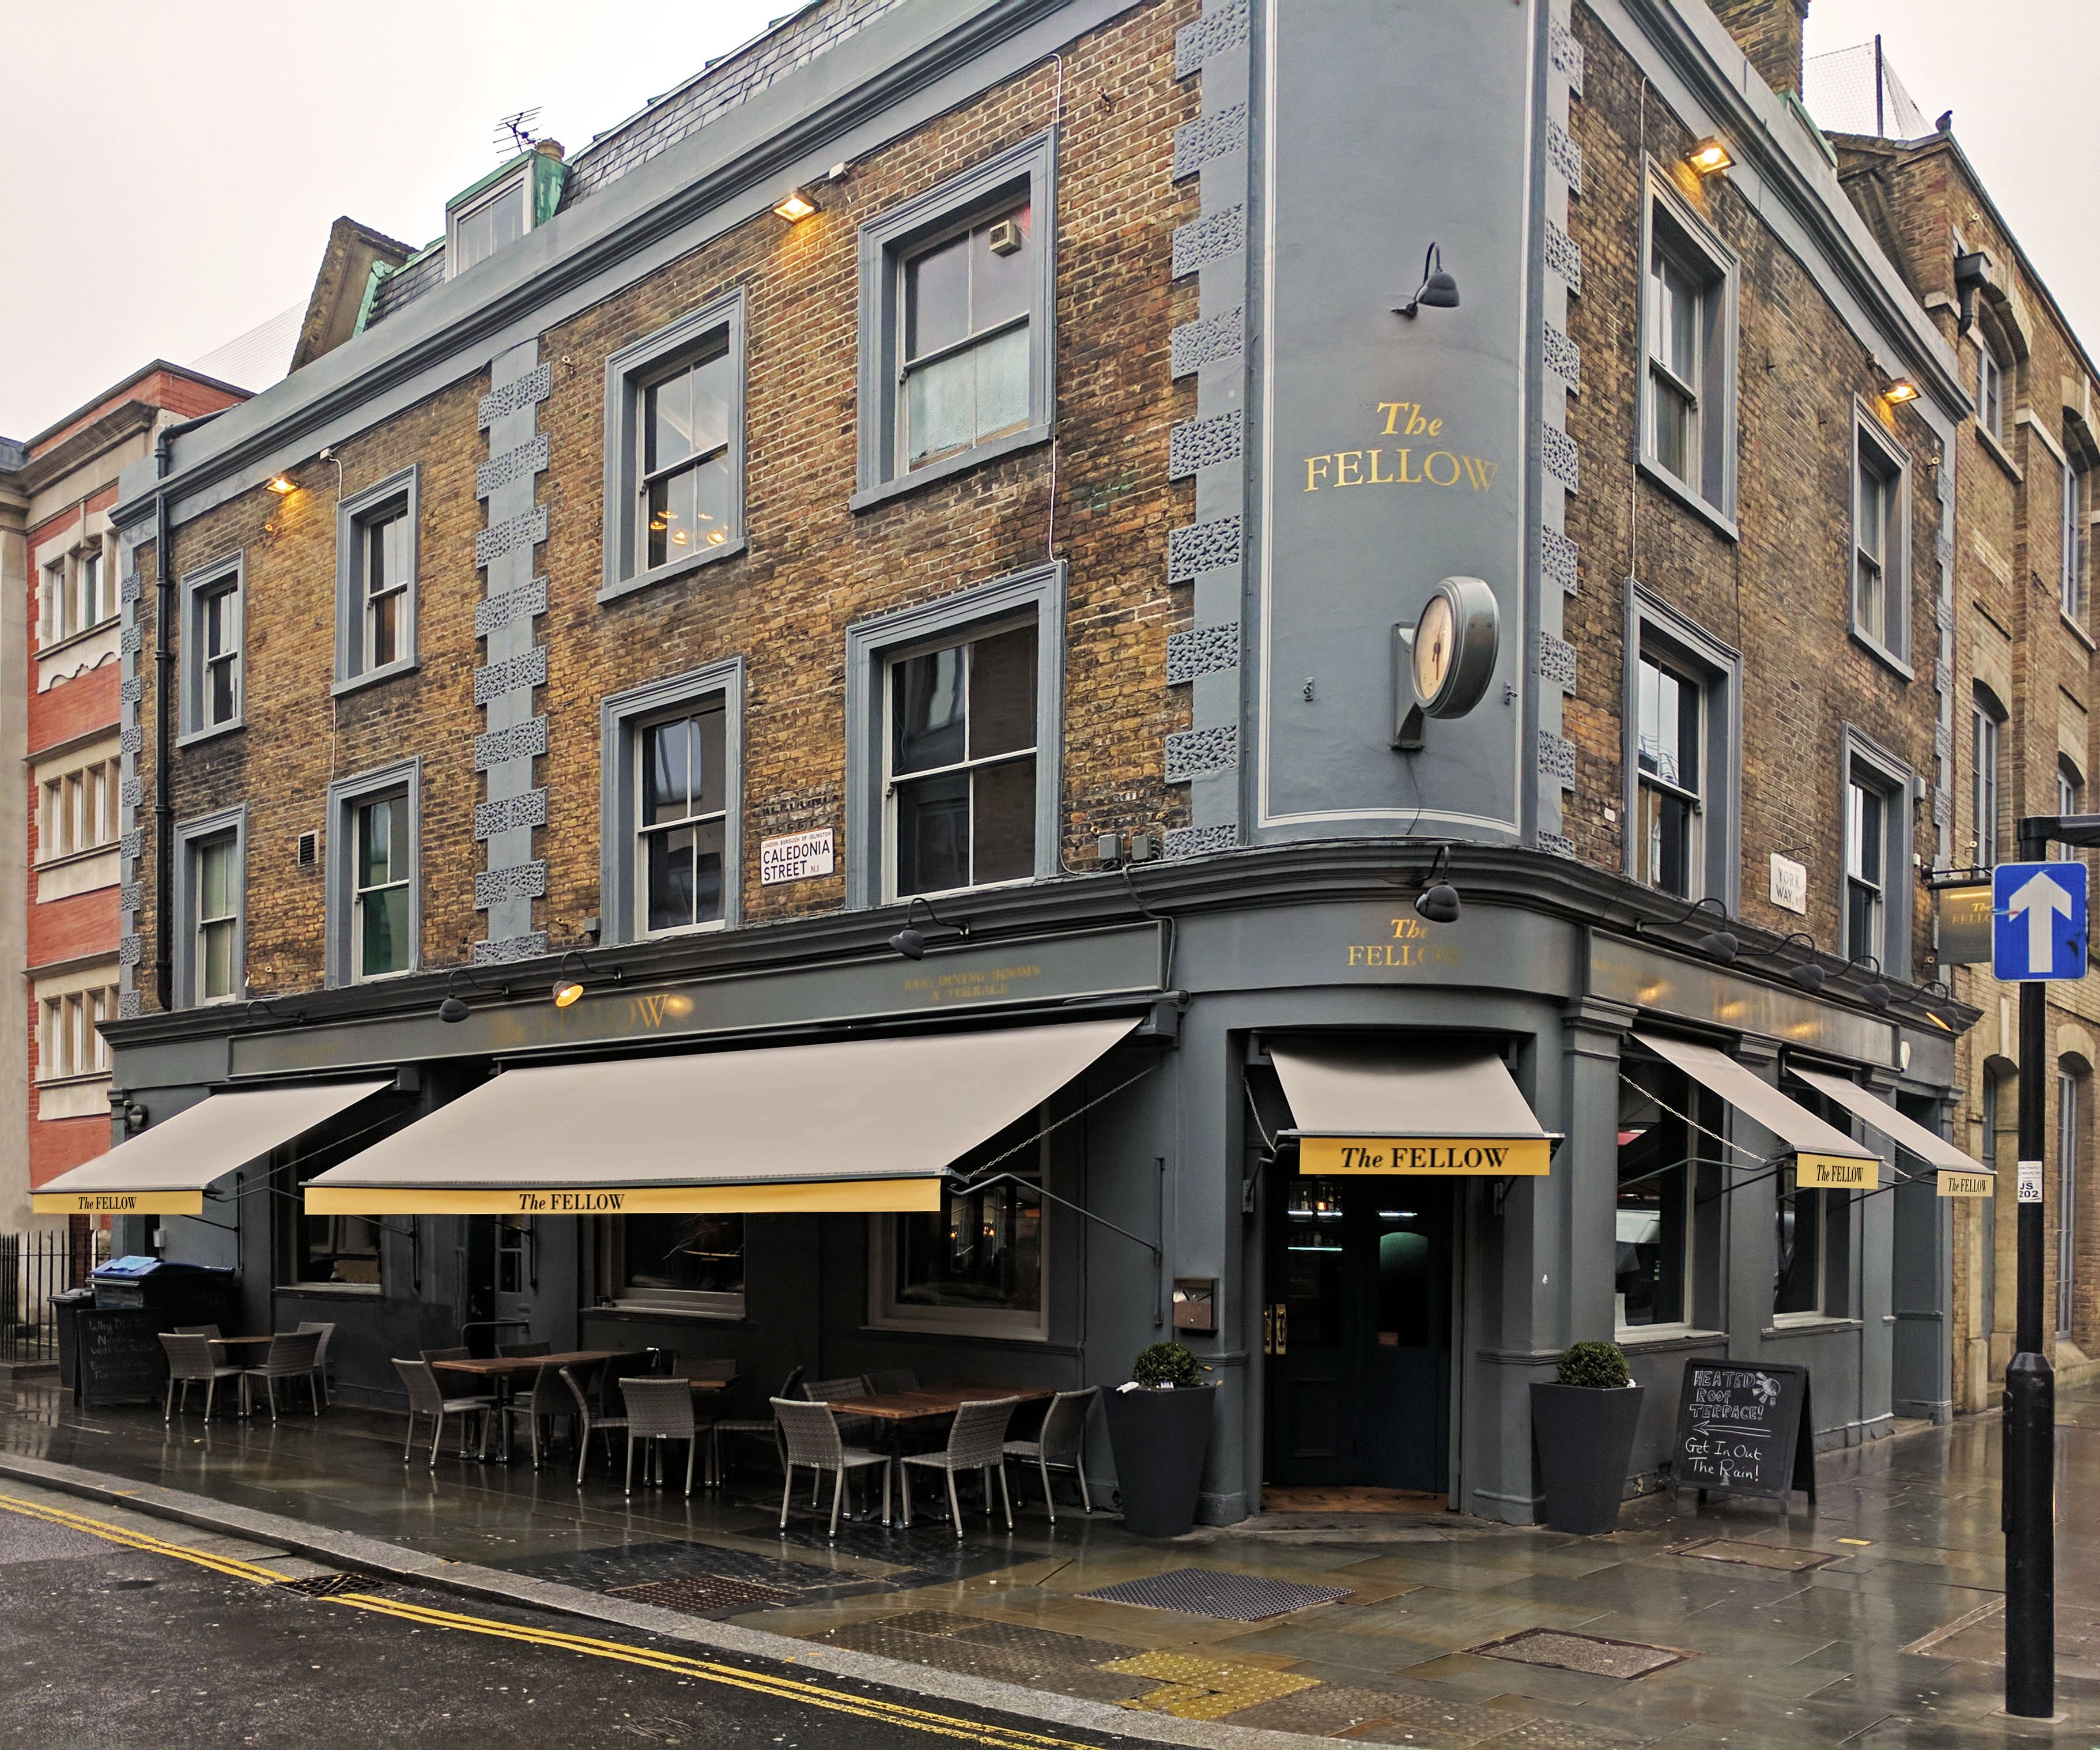 The fellow pub awnings